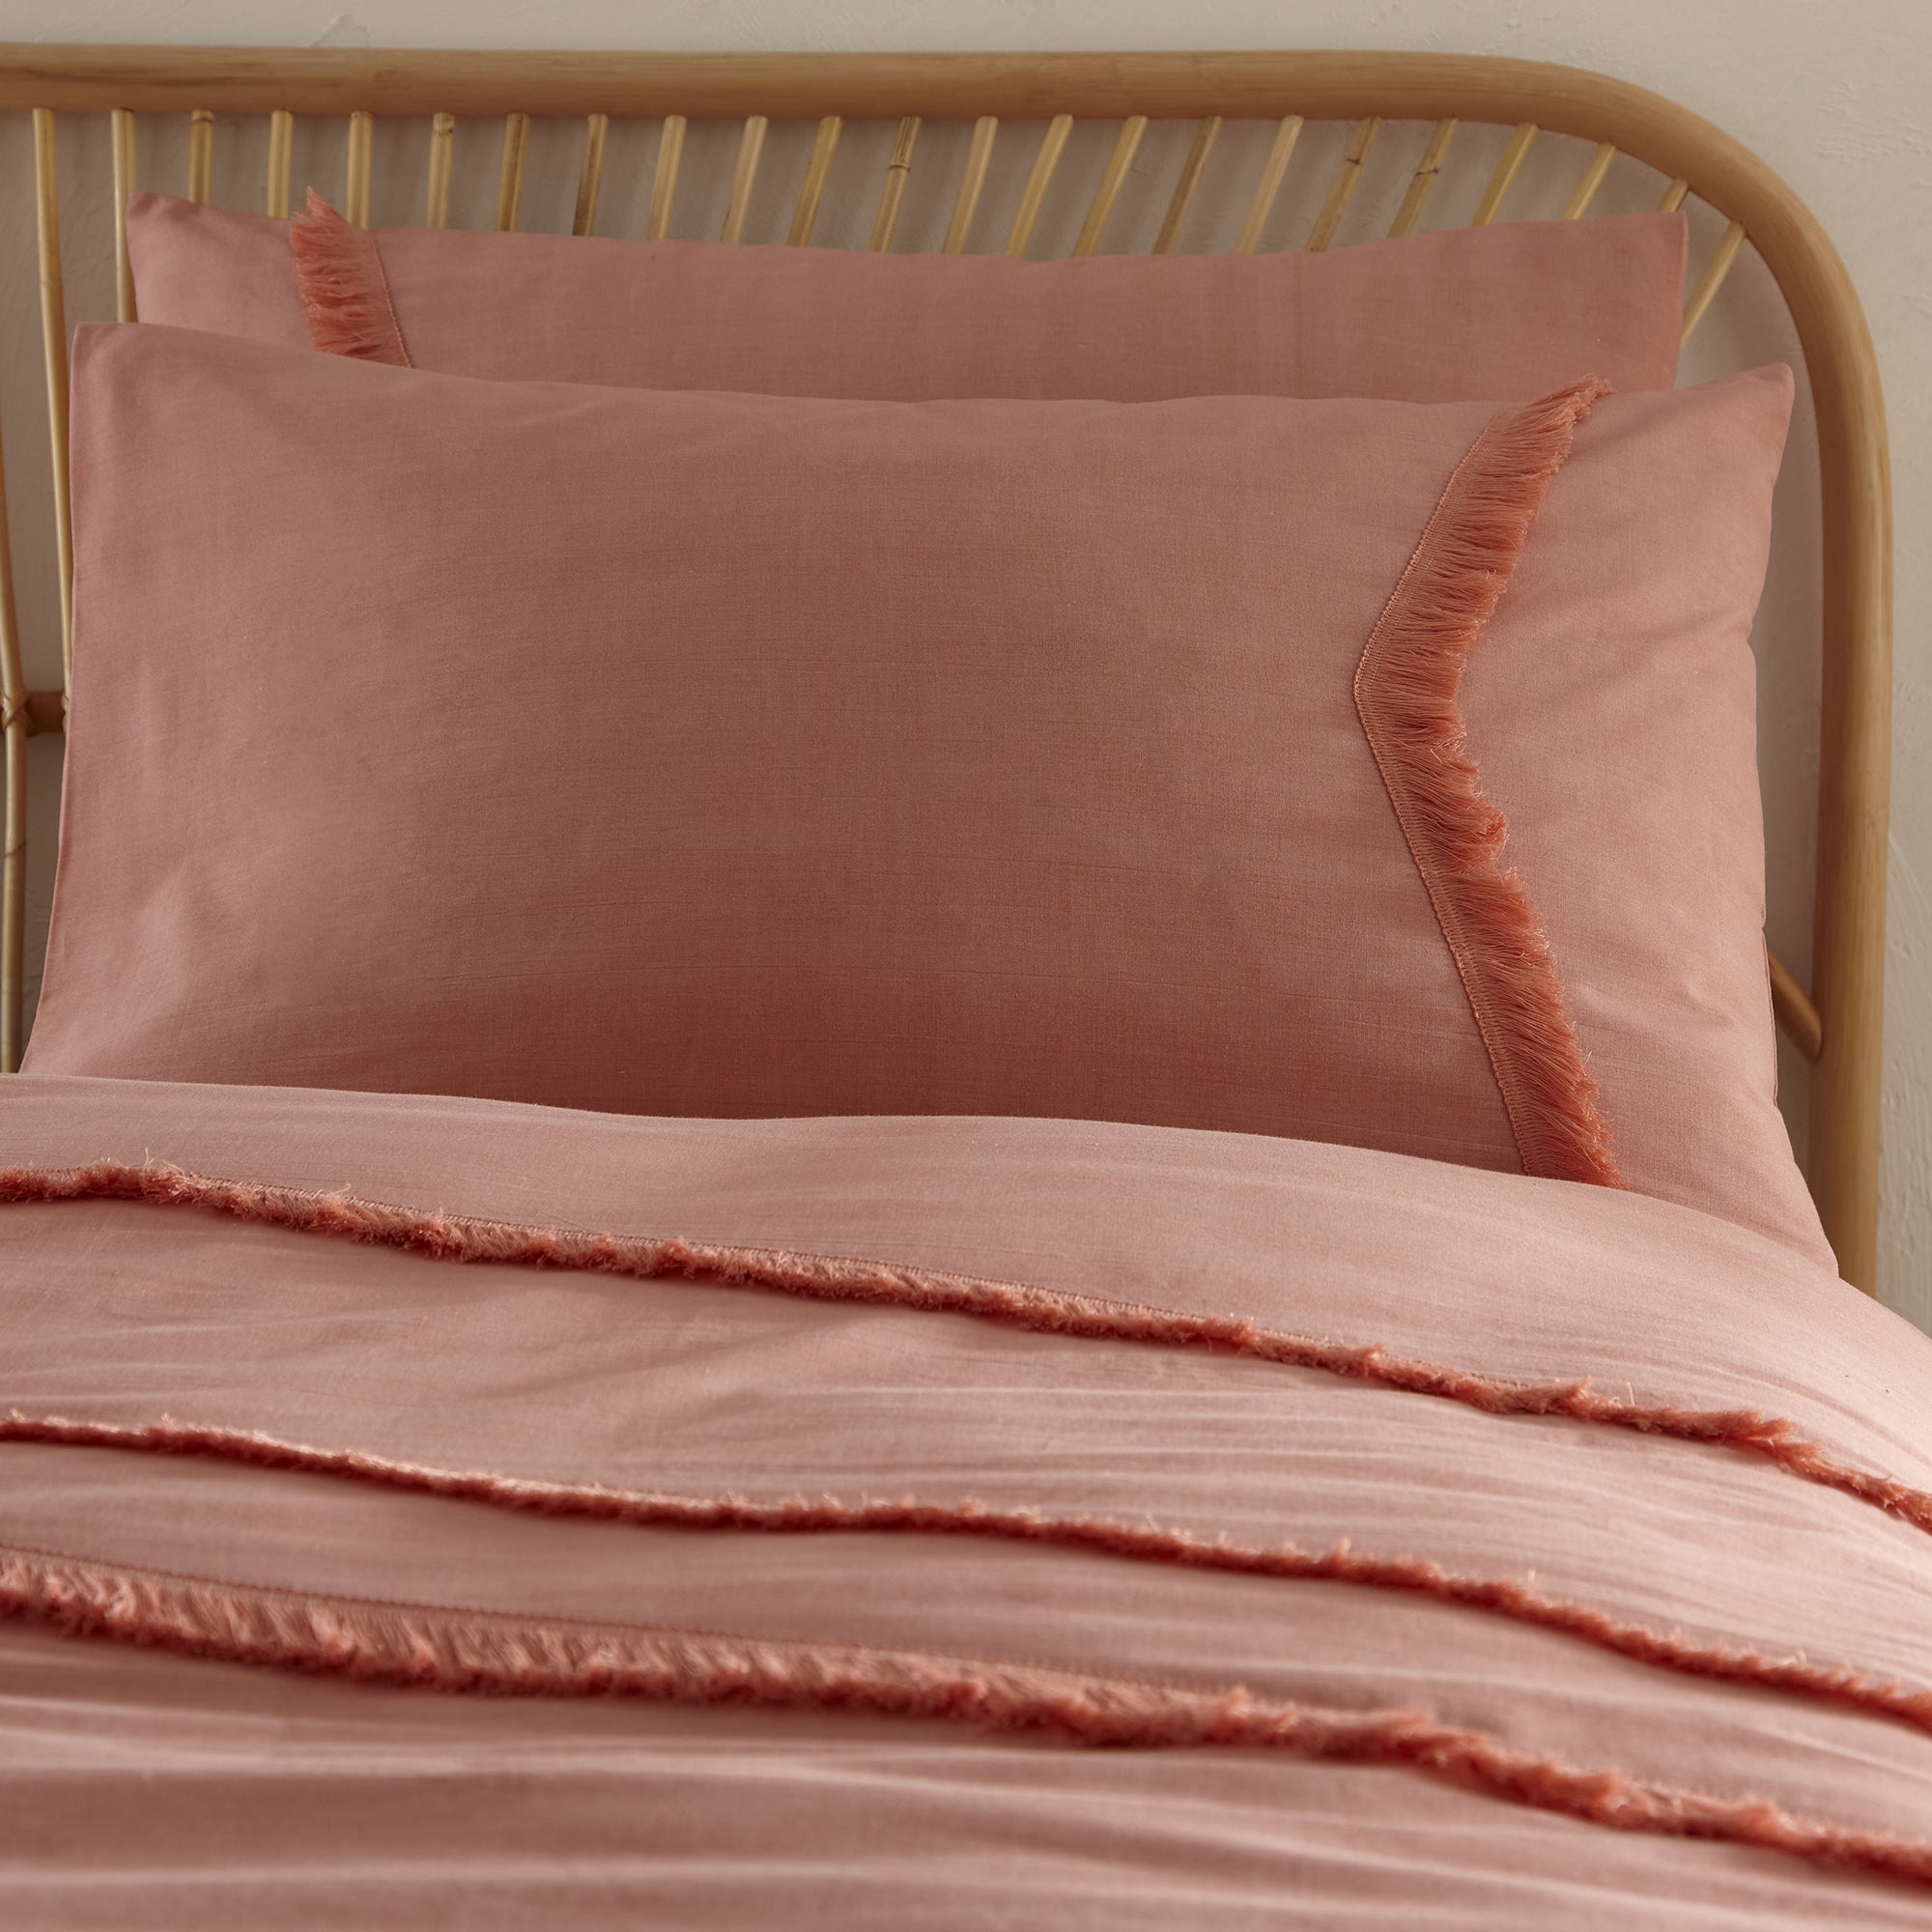 Tabitha - Tassel Relaxed Cotton Duvet Cover Set in Dark Coral - by Appletree Loft